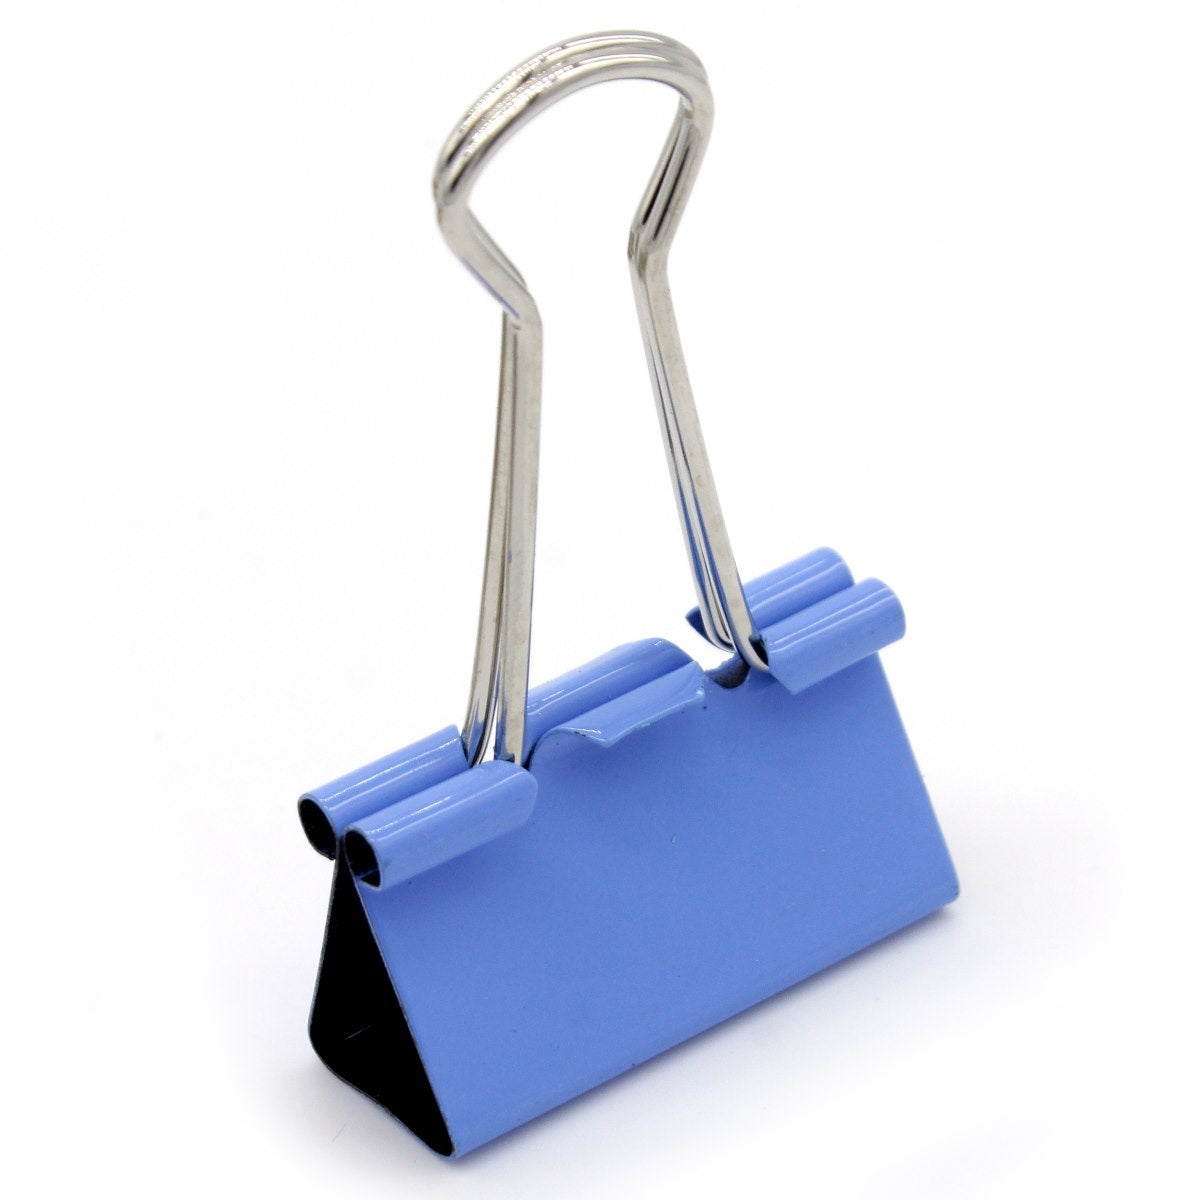 Set of 24 Pcs Binder Clips Assorted Colors 32mm - For Shops, Schools, Corporates, Office Use JABCC32MM